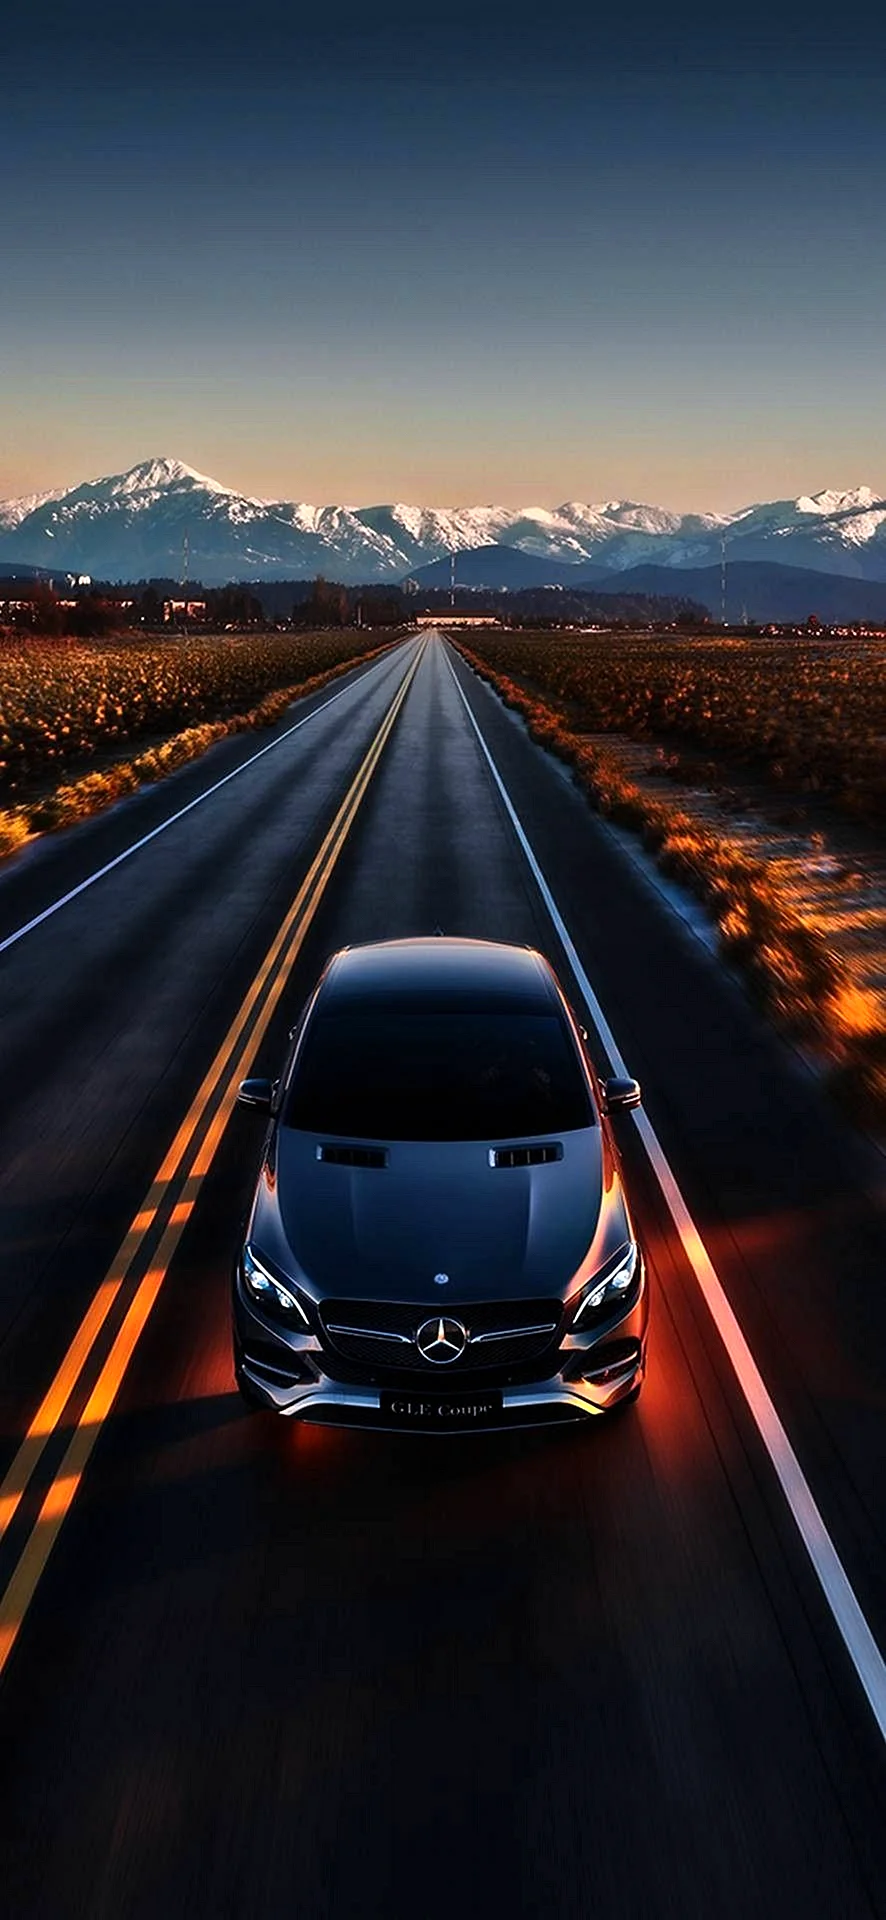 Mercedes For iPhone Wallpaper For iPhone